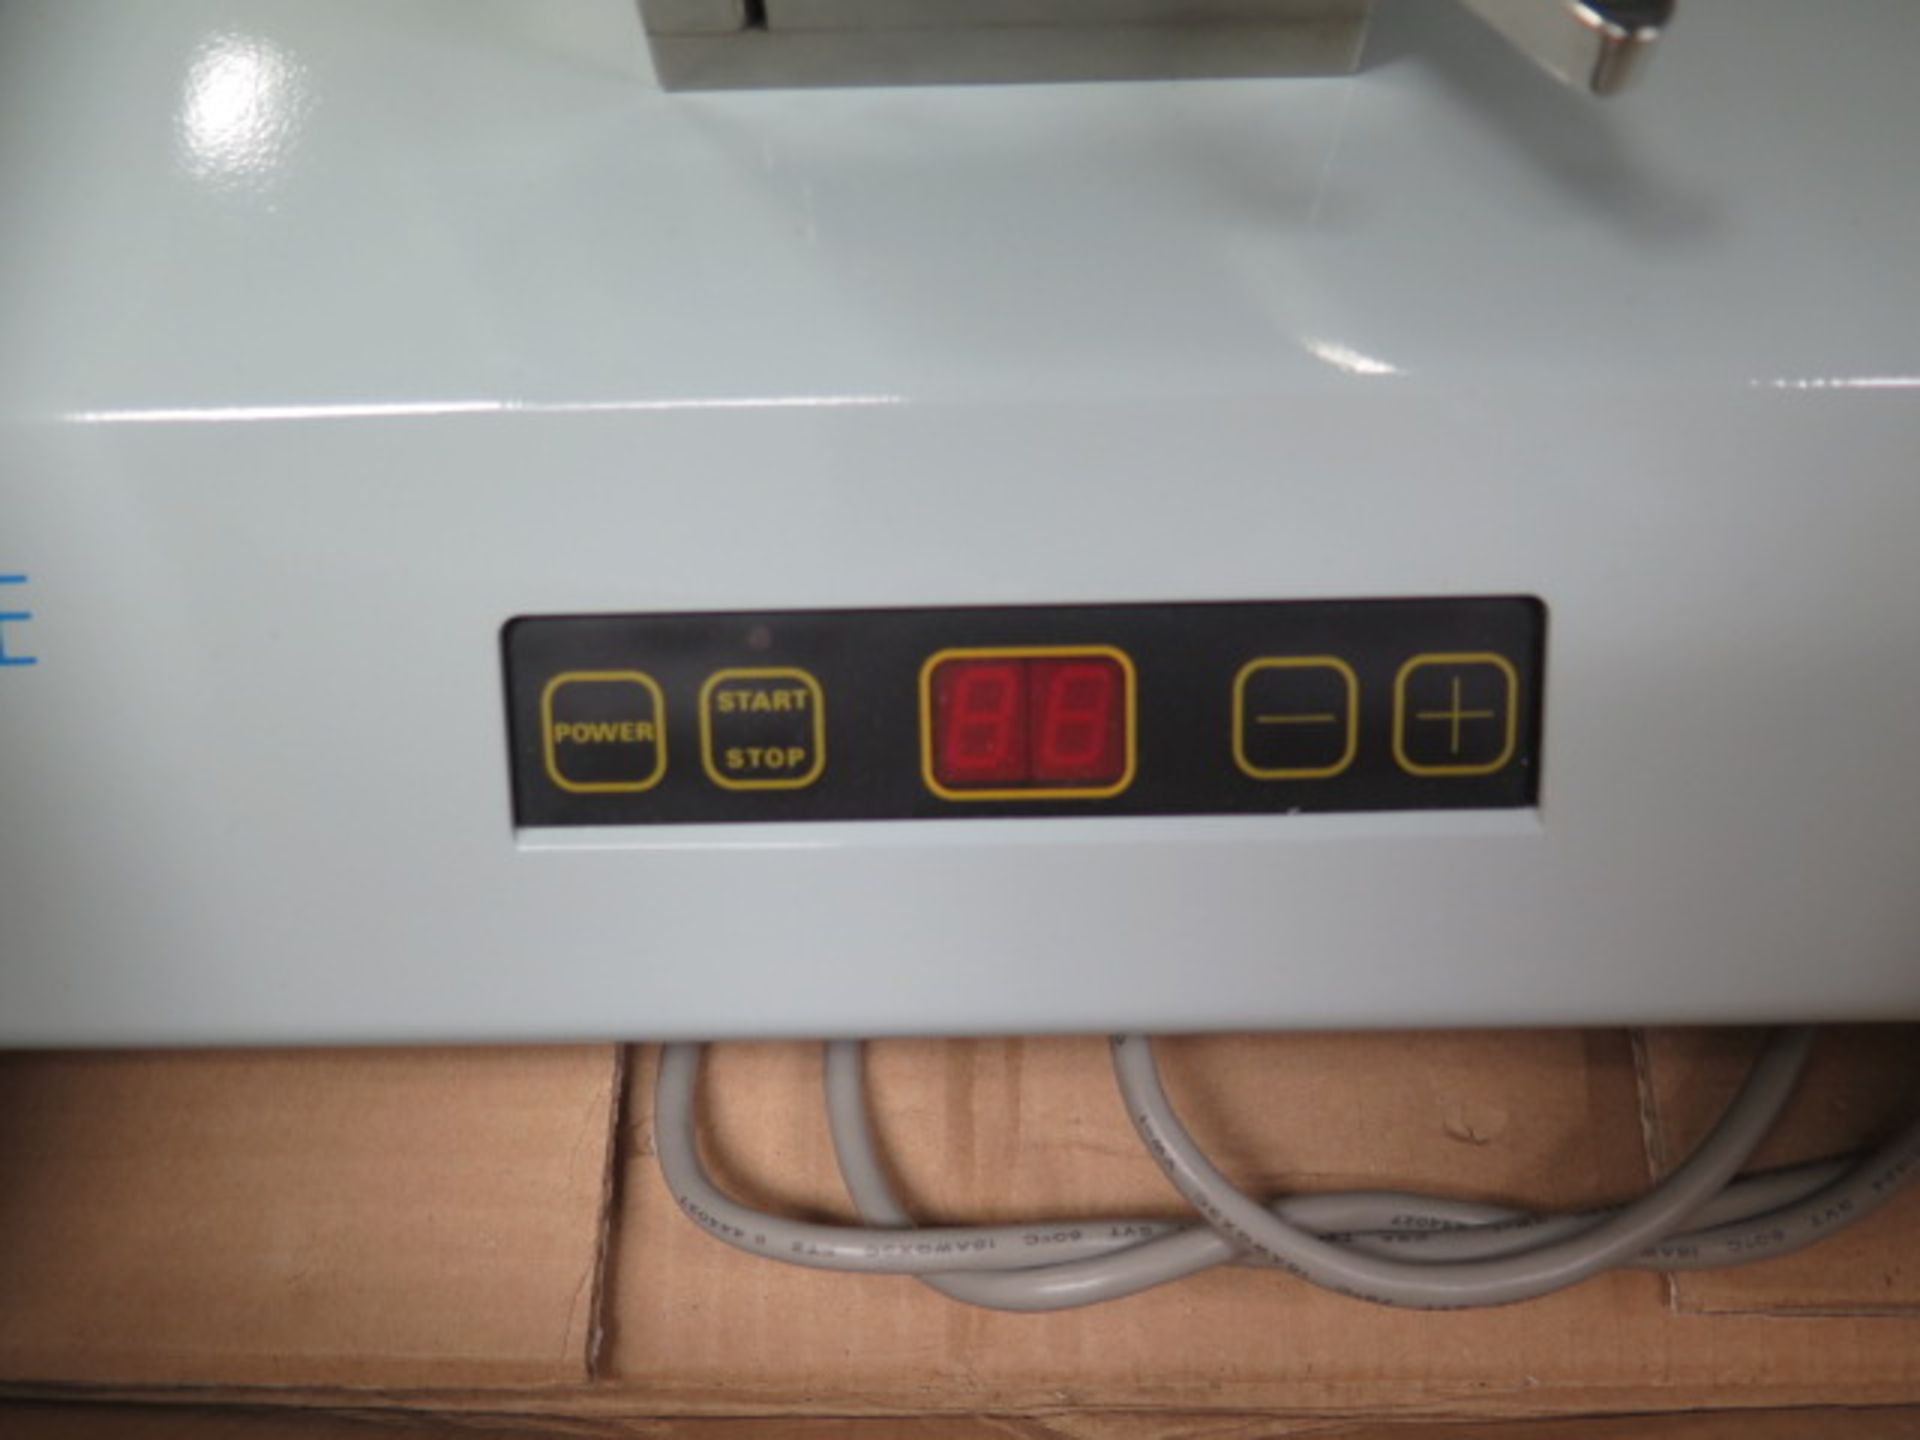 Millipore Steritest "Compact" Sterile Testing Peristaltic Pump (SOLD AS-IS - NO WARRANTY) - Image 4 of 7